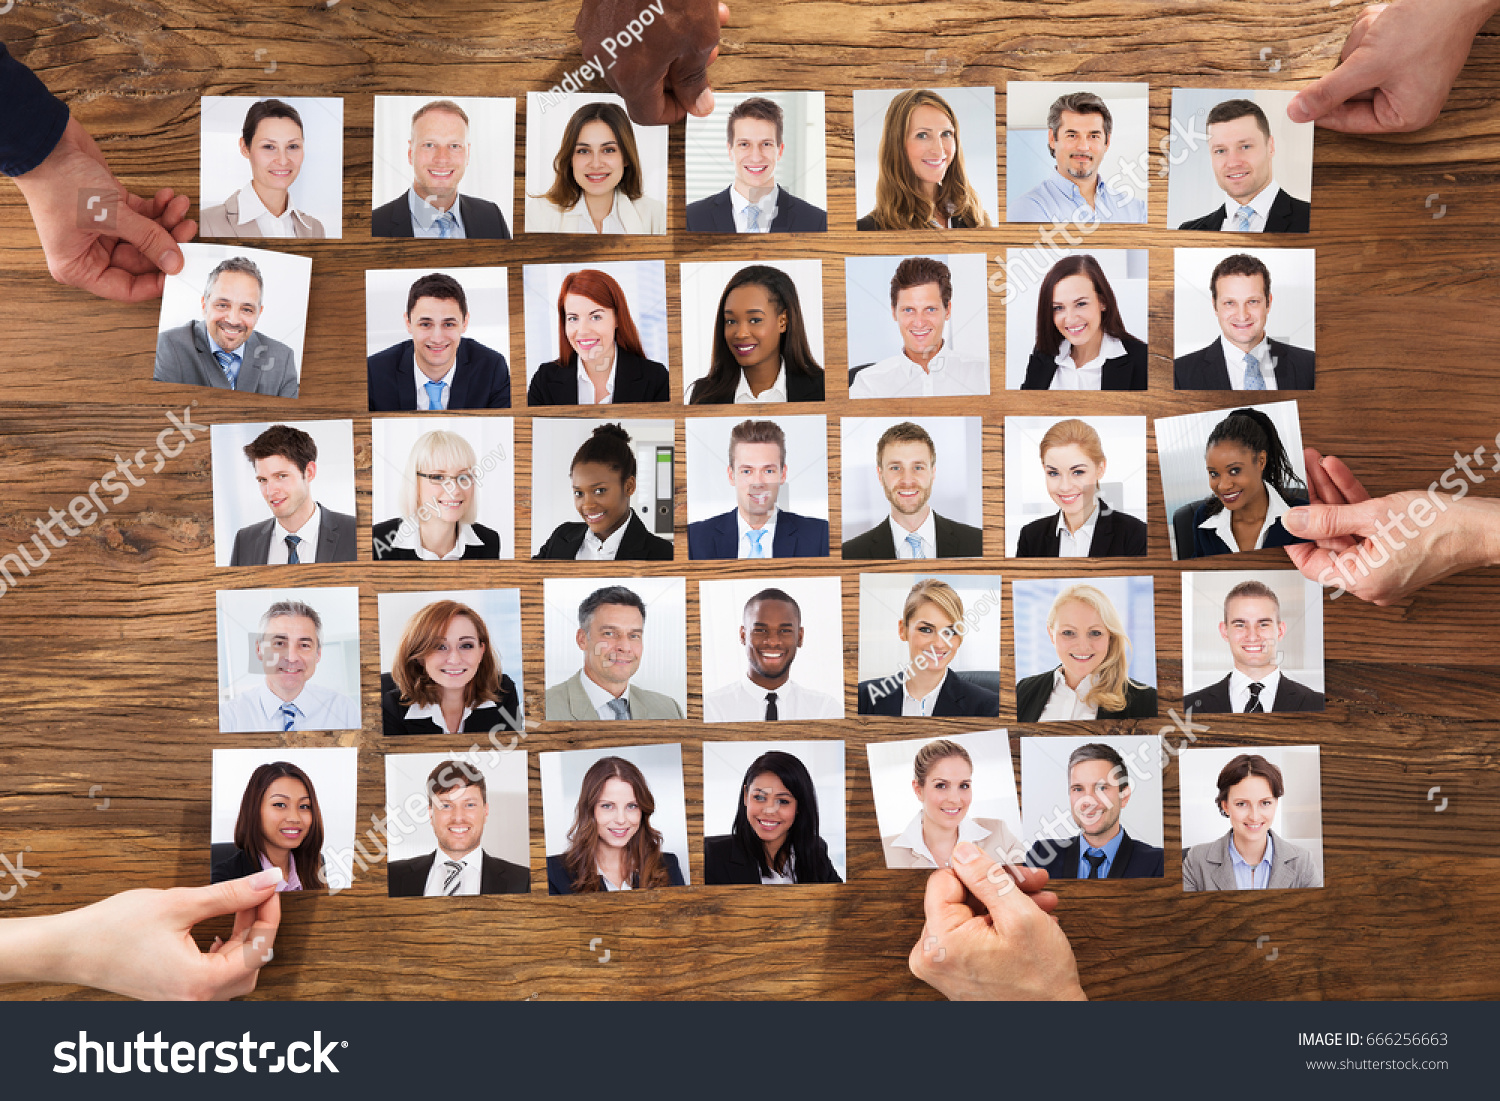 Businesspeople Hand Selecting The Candidate Portrait Photo For Hiring In Job #666256663